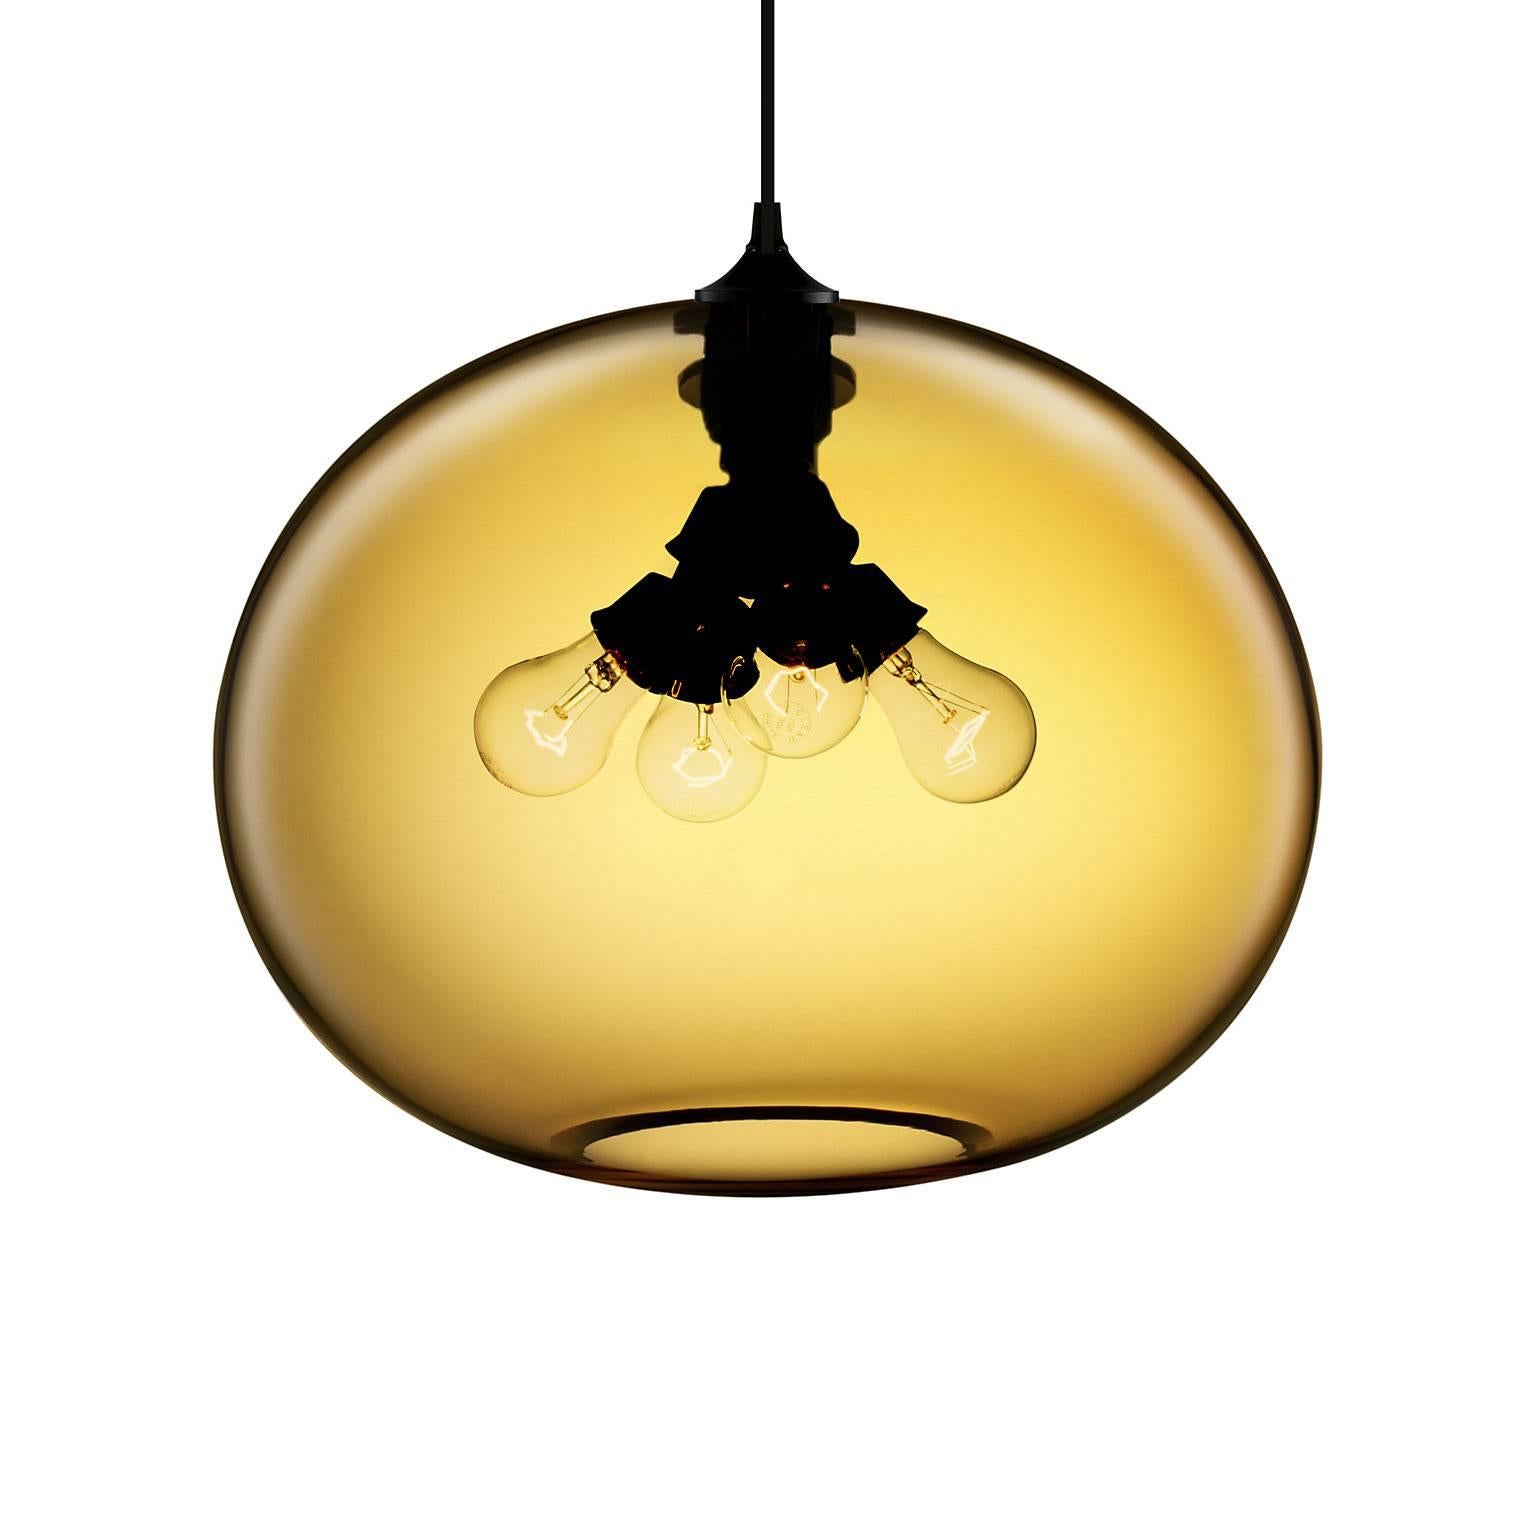 The allure of the abundant terra is the presence of four bulbs at the pendant’s centre, radiating rich, ambient light. Every single glass pendant light that comes from Niche is handblown by real human beings in a state-of-the-art studio located in